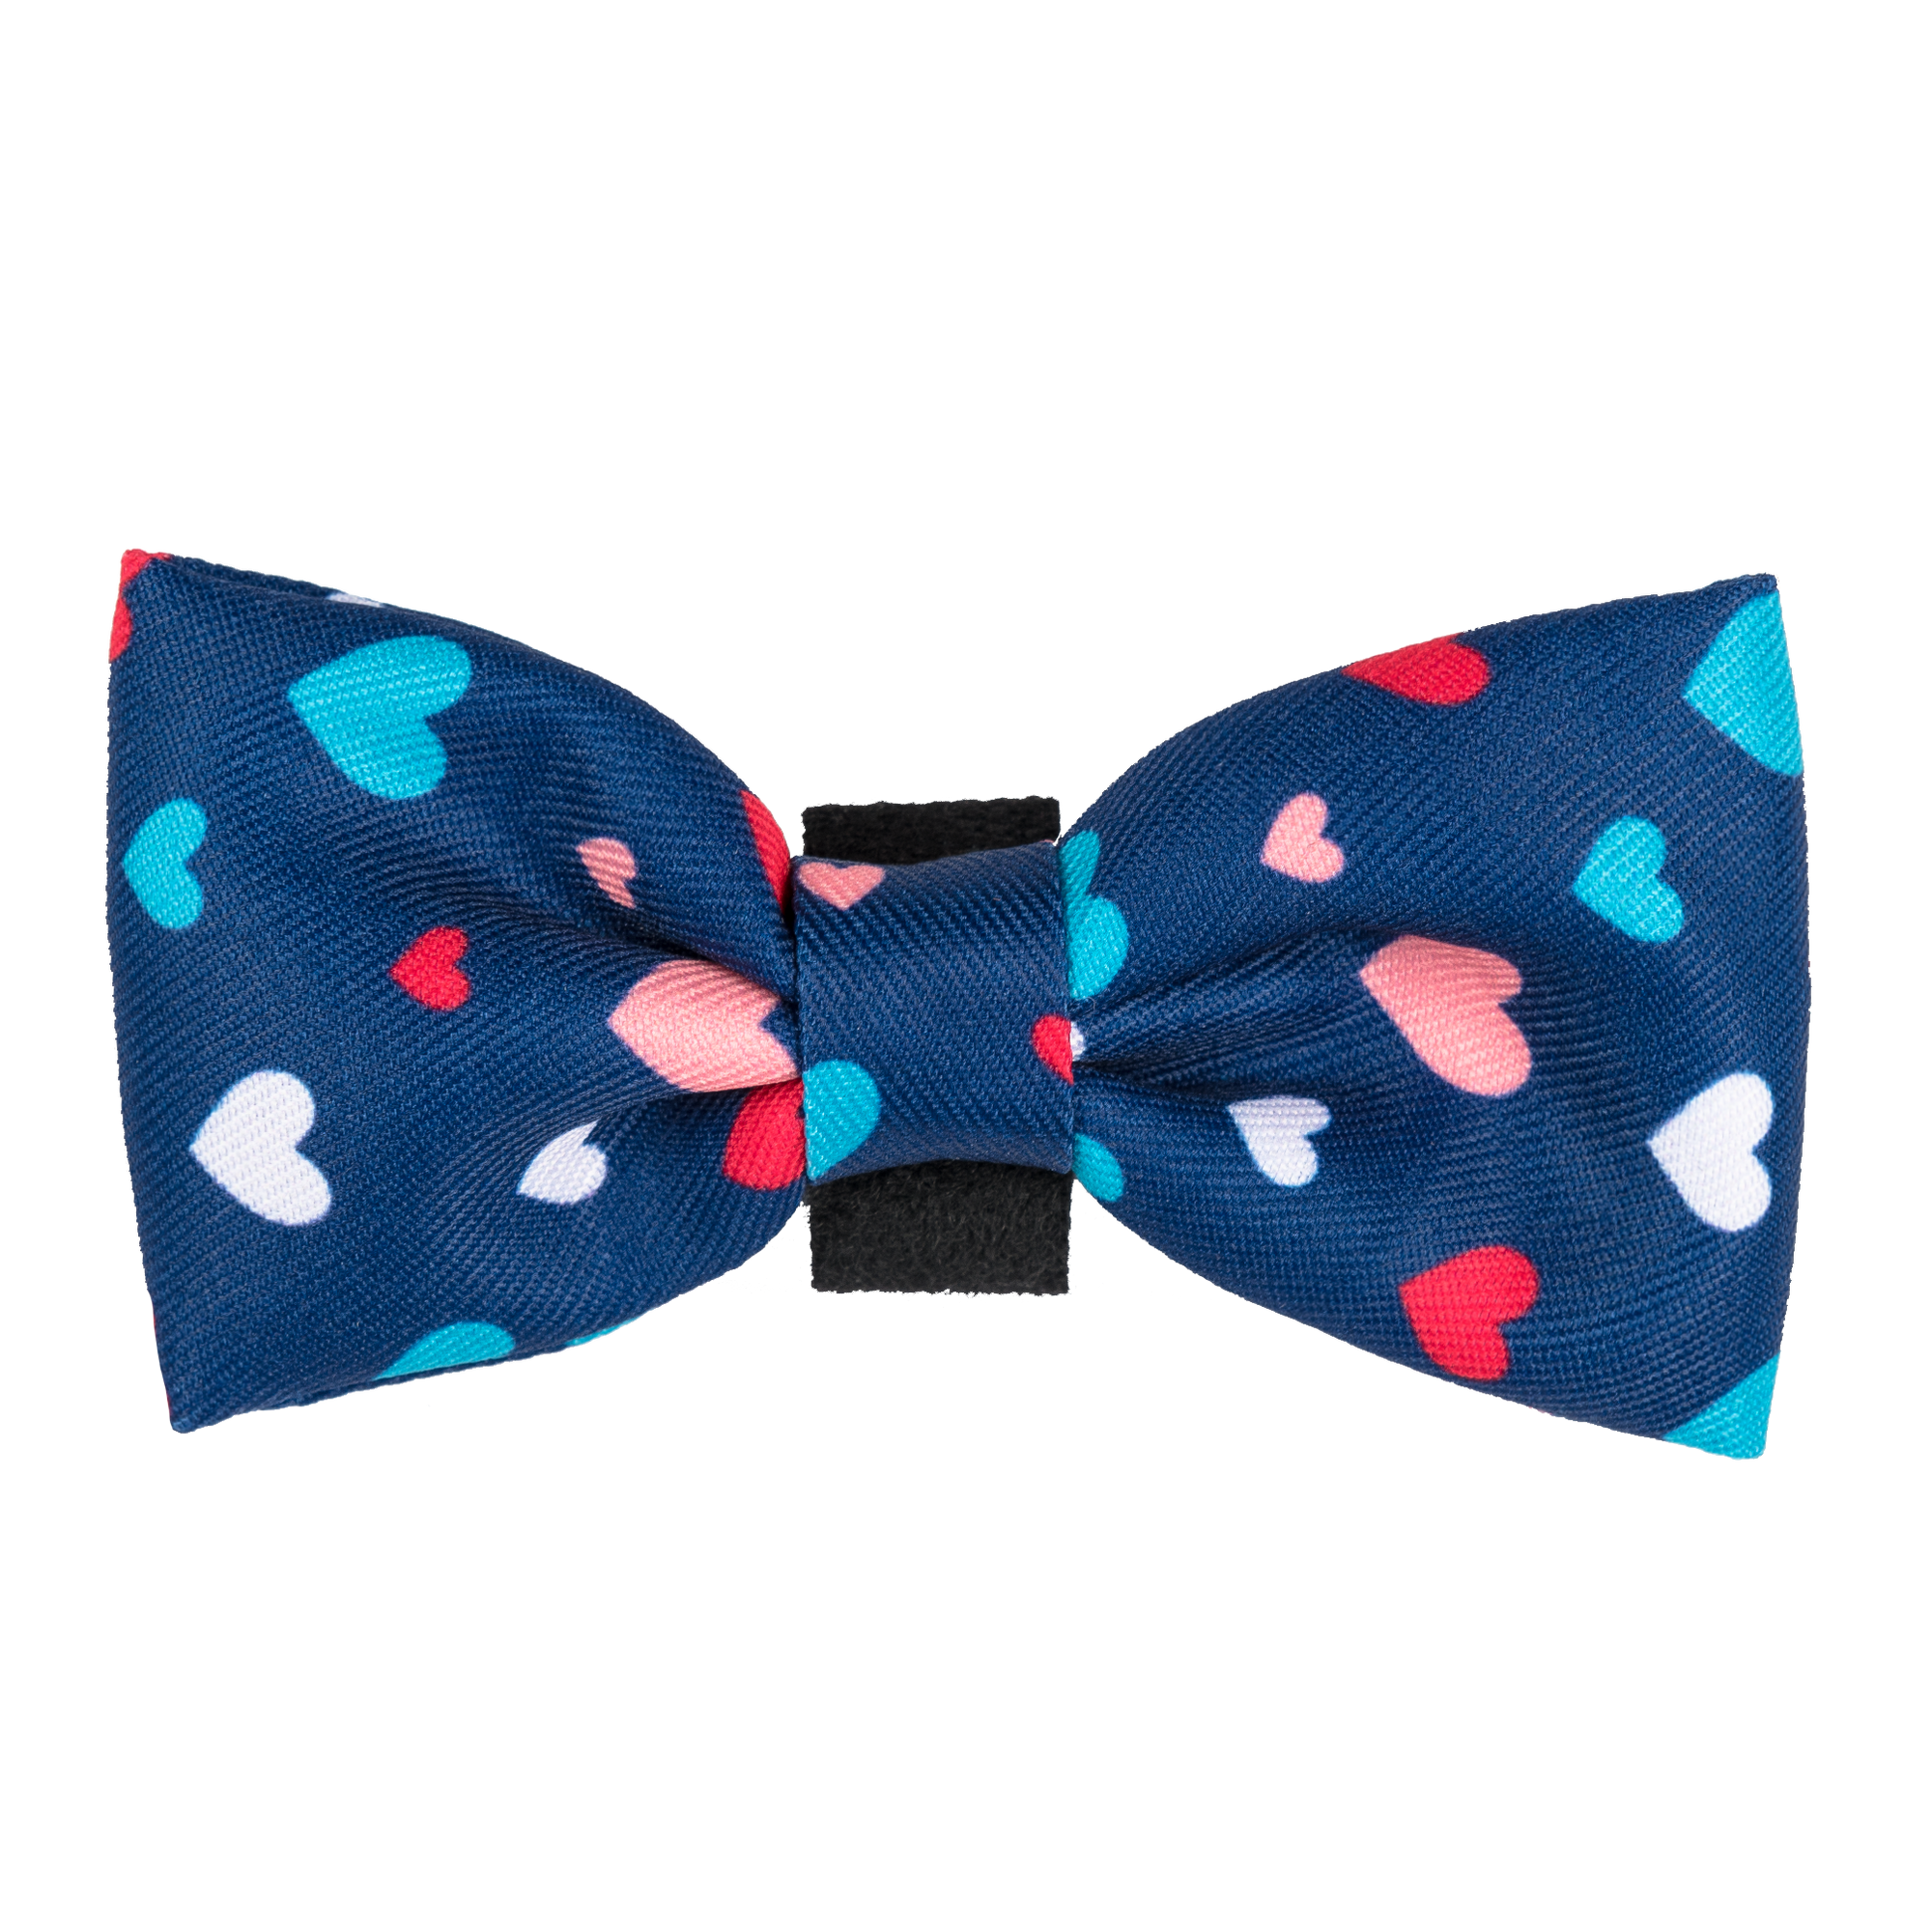 Bow Tie - All You Need Is Love.